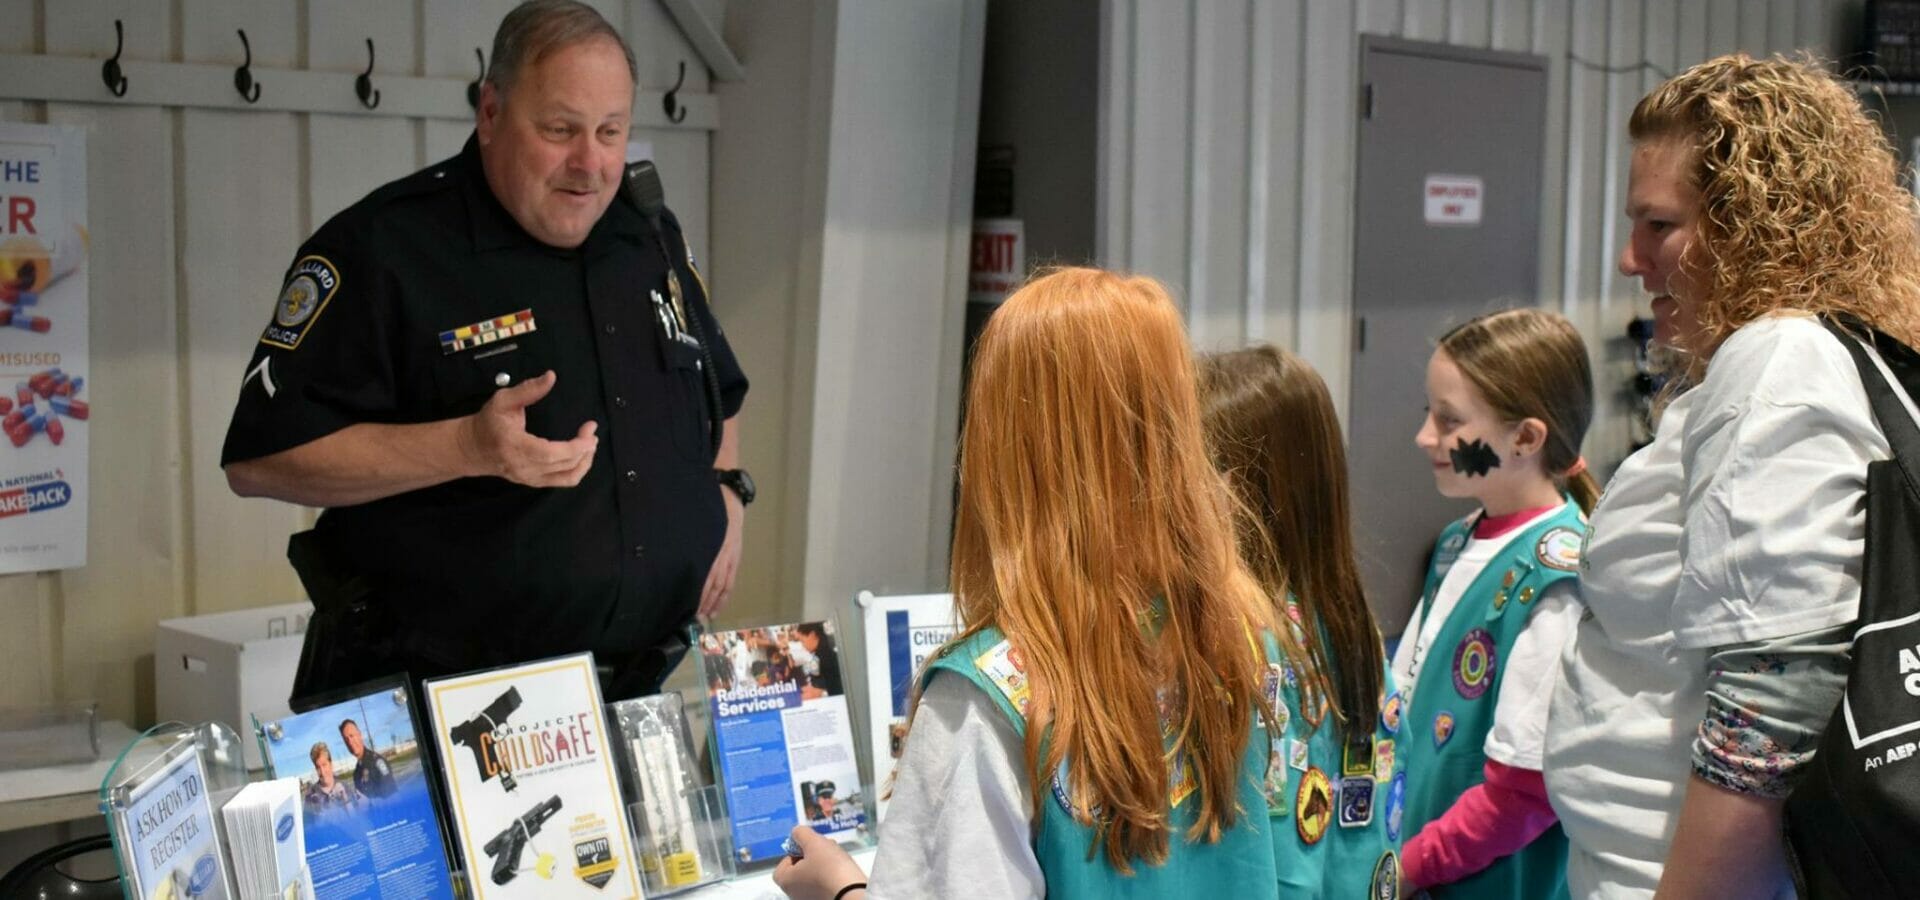 Officer Deaton talking to a group of girl scouts